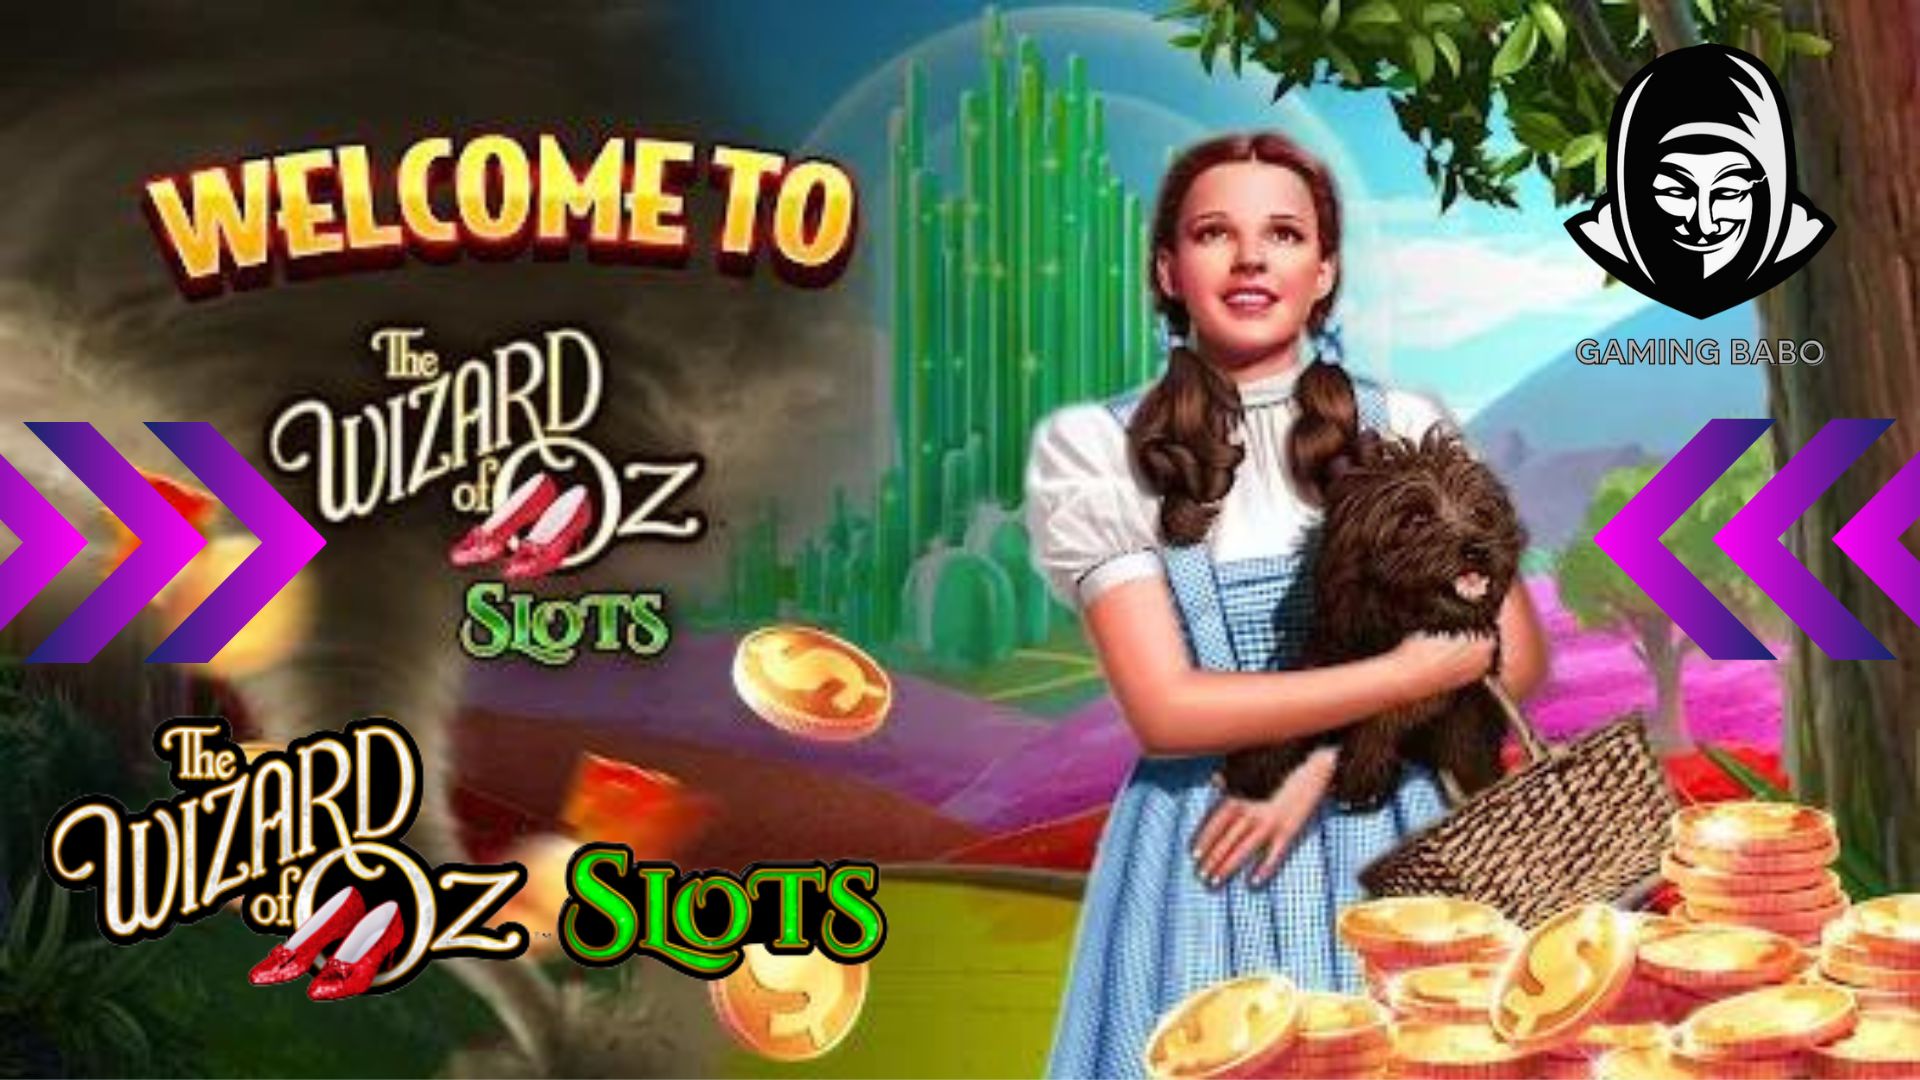 Wizard of Oz Slots tips and tricks